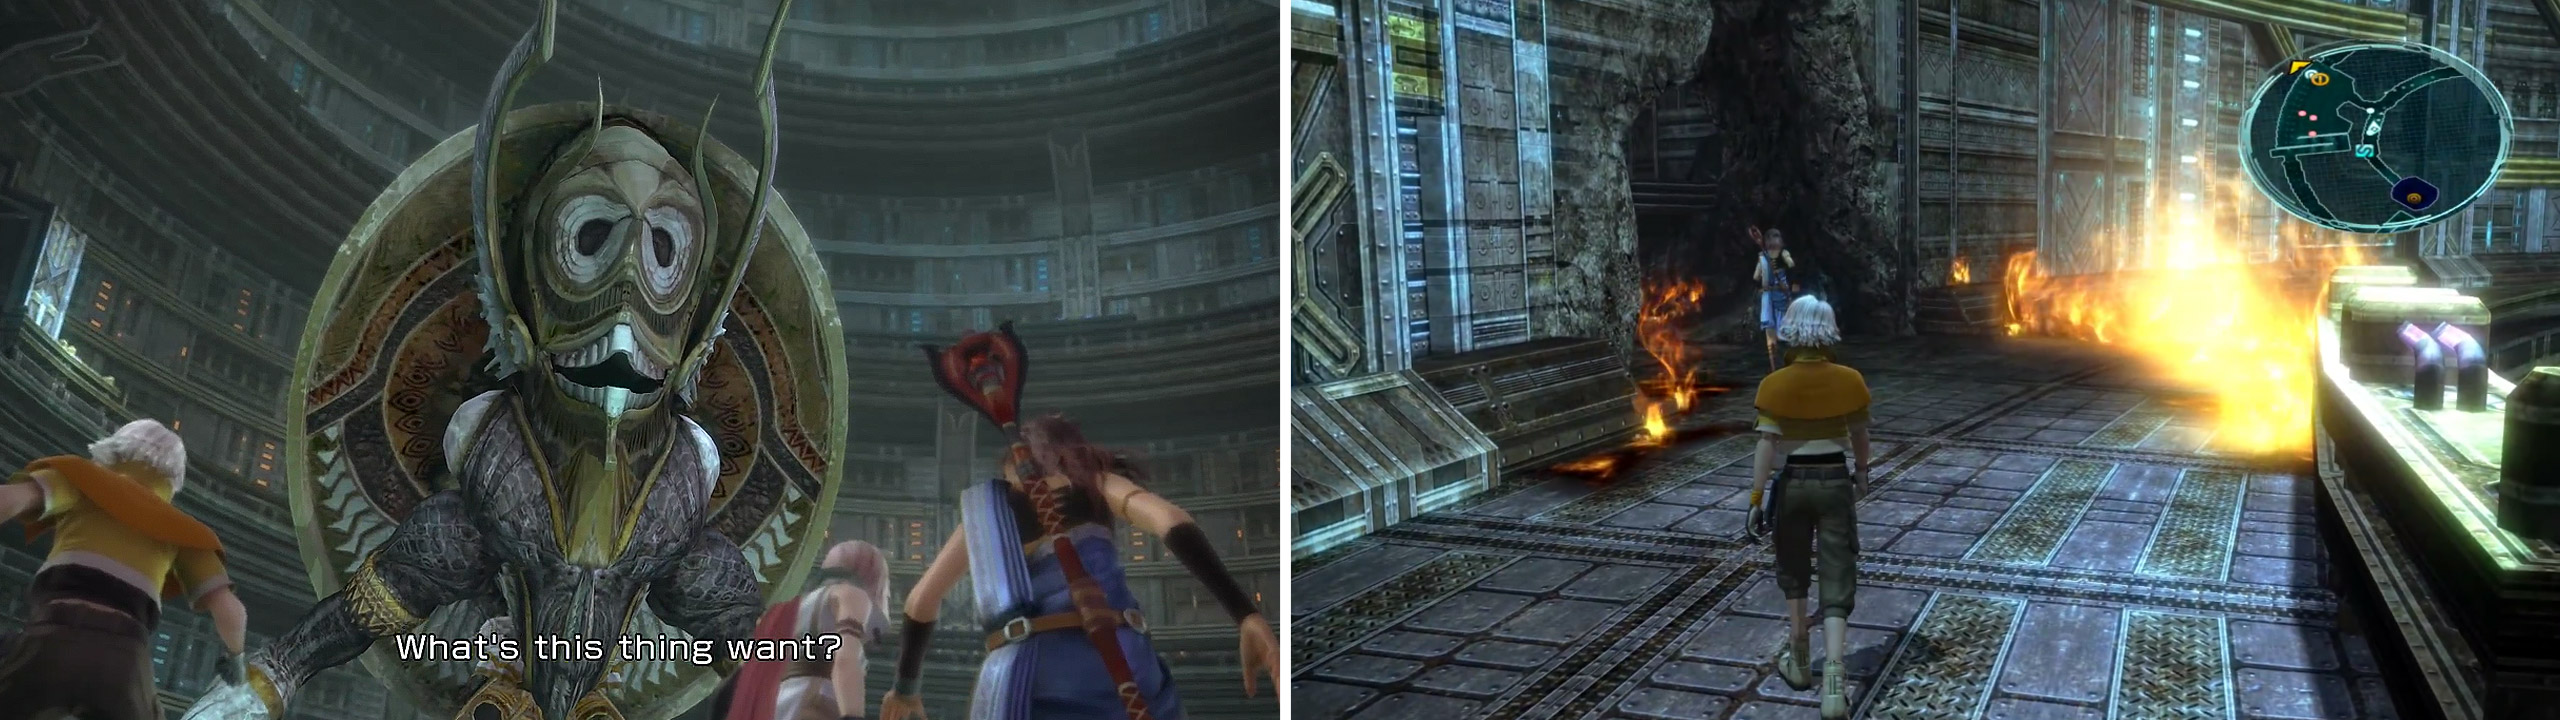 Dahaka - Guardian of the Tower (left) and the hole in the wall he creates (right).